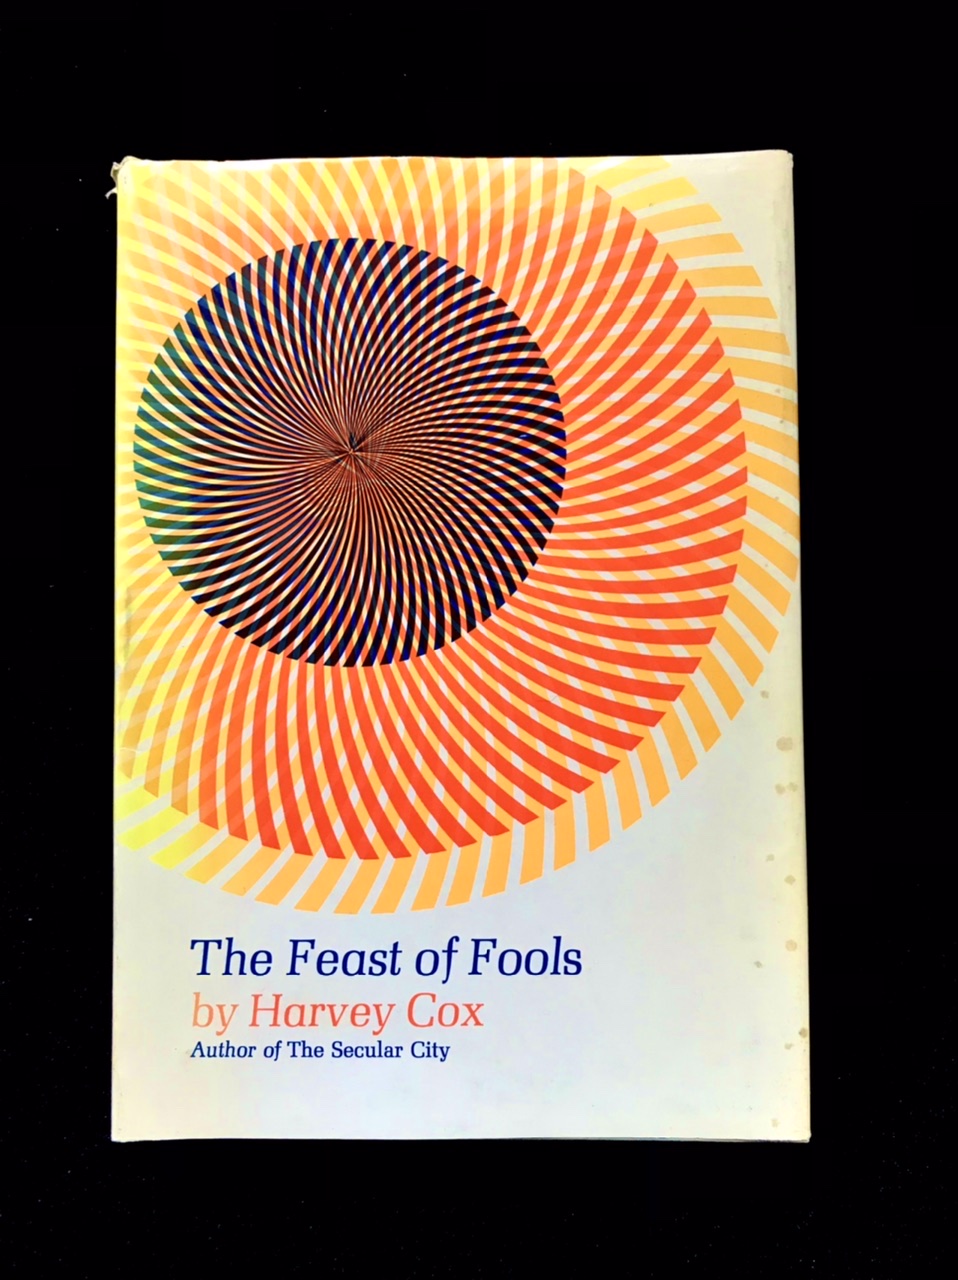 The Feast of Fools: Theological Essay on Festivity and Fantasy by Harvey Cox